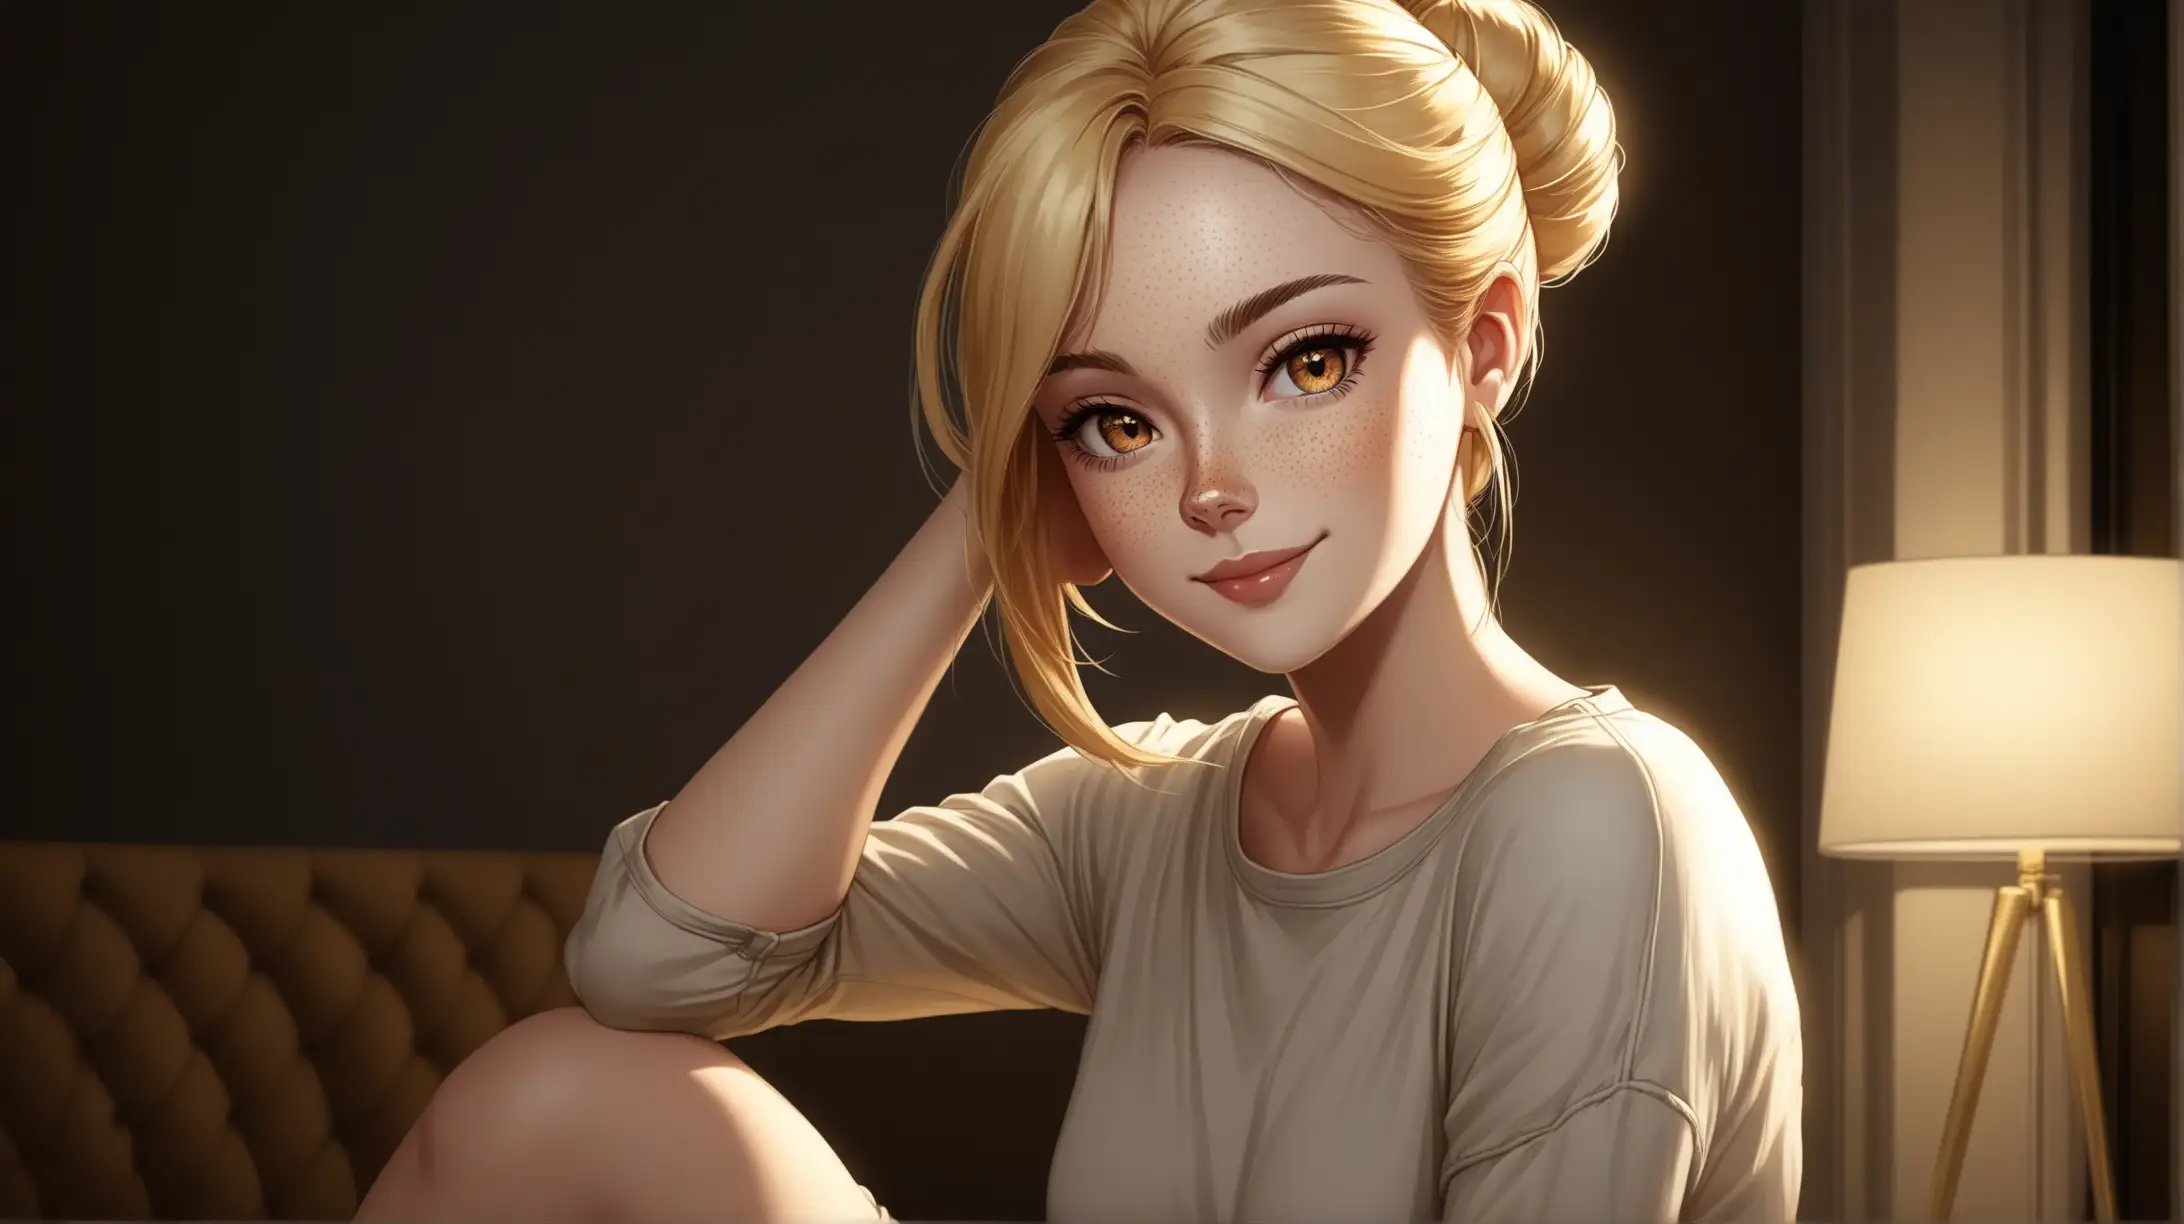 Draw a woman, long blonde hair in a bun, gold eyes, freckles, perky figure, casual outfit, high quality, cowboy shot, indoors, seductive pose, dim lighting, smiling at the viewer